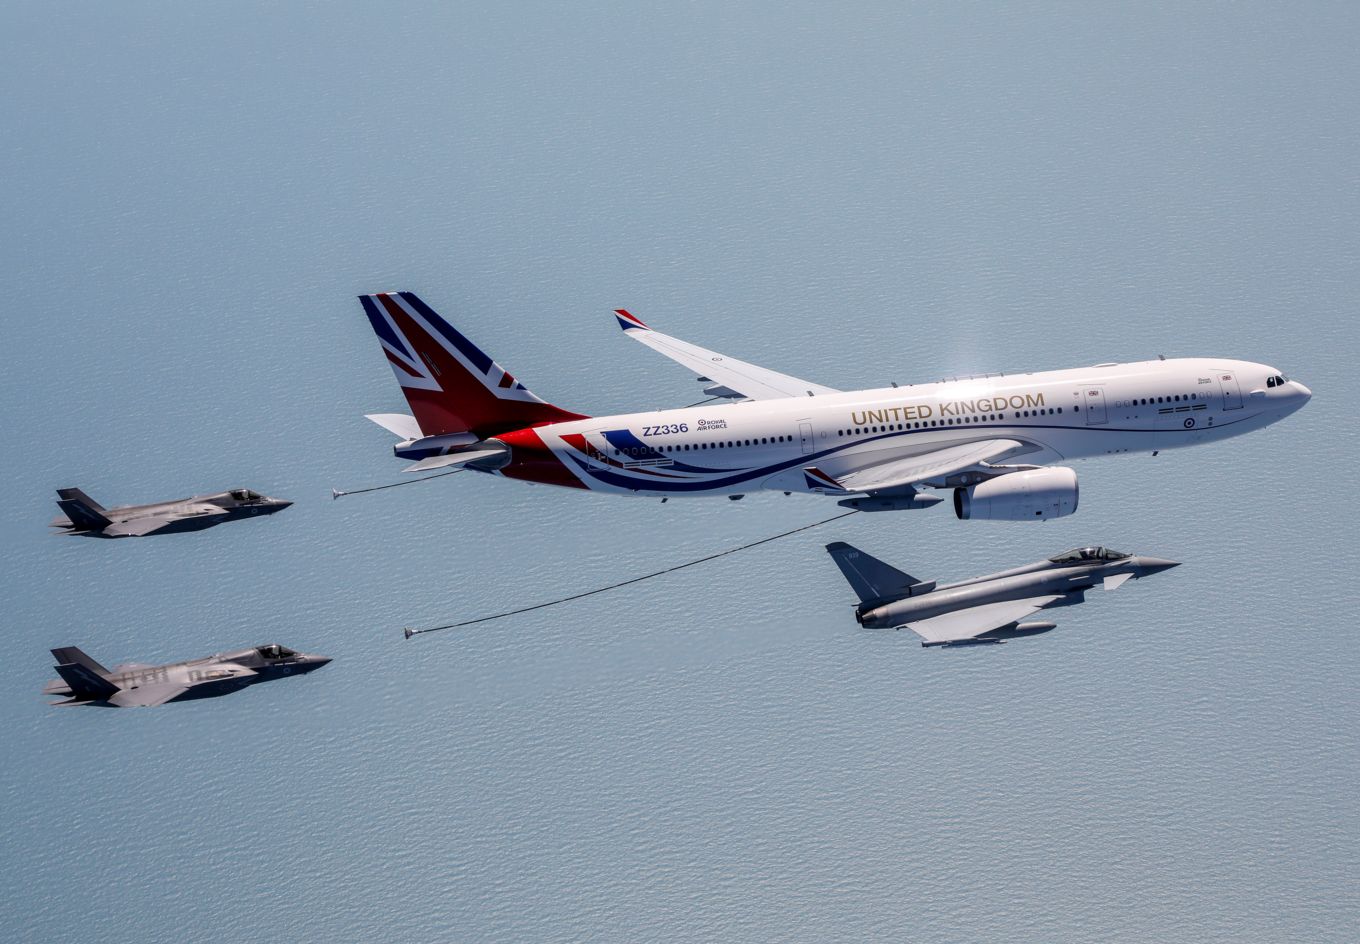 Newly painted RAF Voyager aircraft with Union Flag livery refuelling Typhoon and Lightning aircraft mid-air.